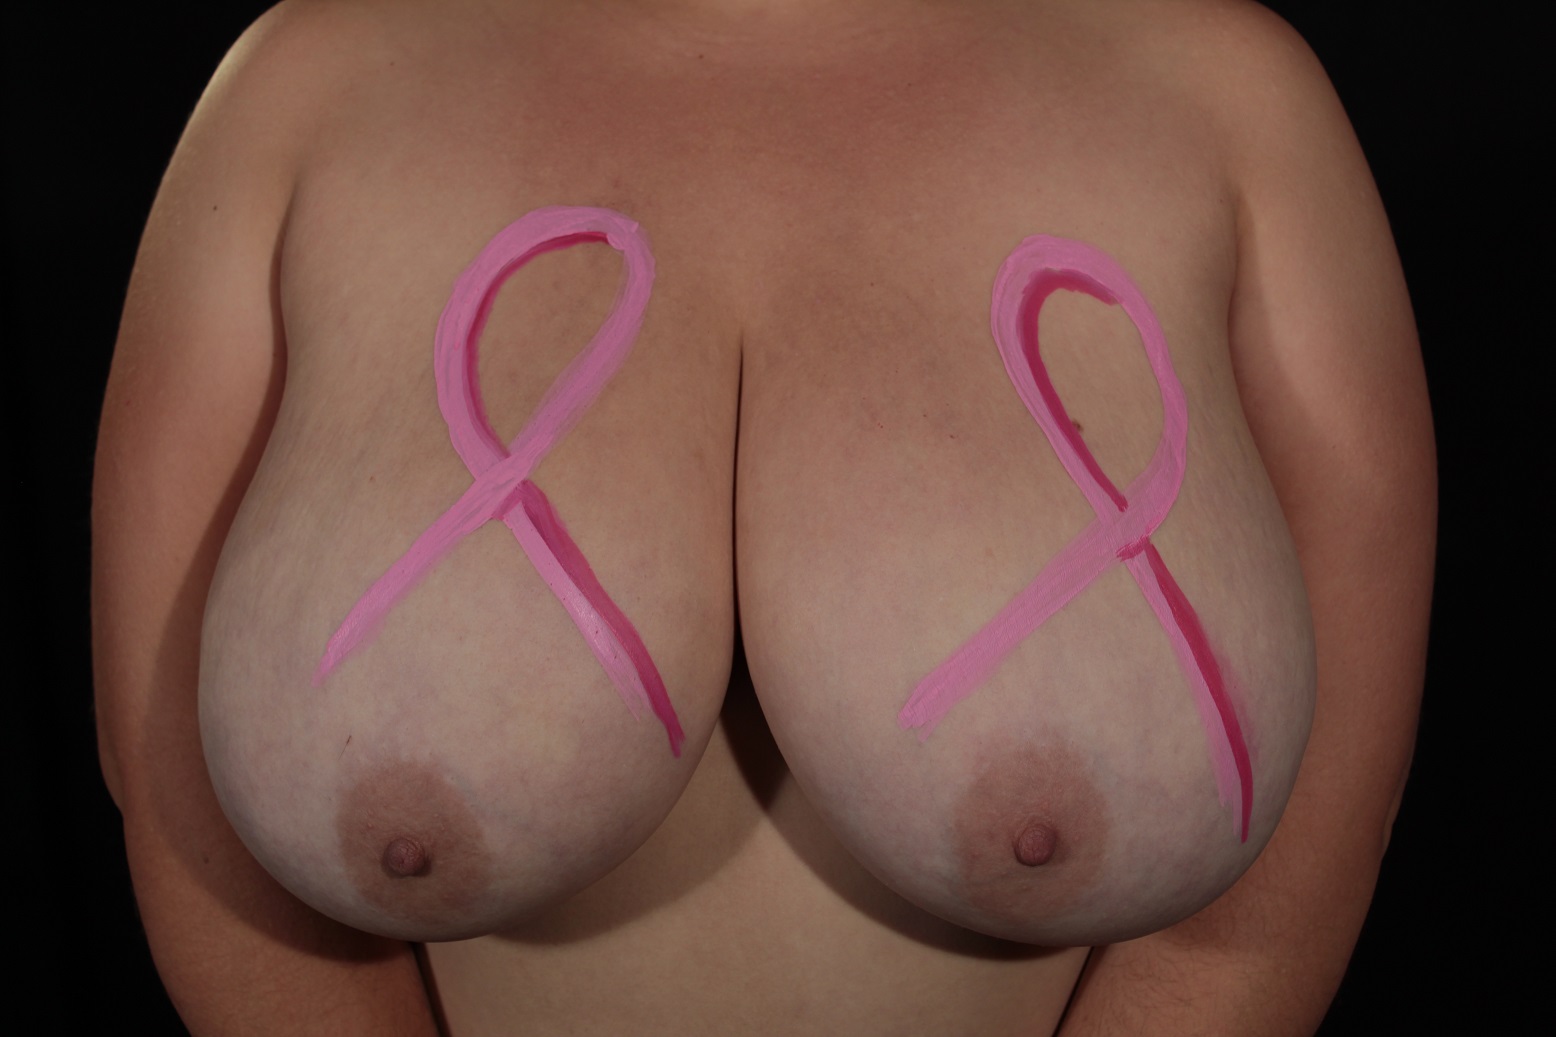 body painting of 2 pink ribbons, one on each of the woman's breasts